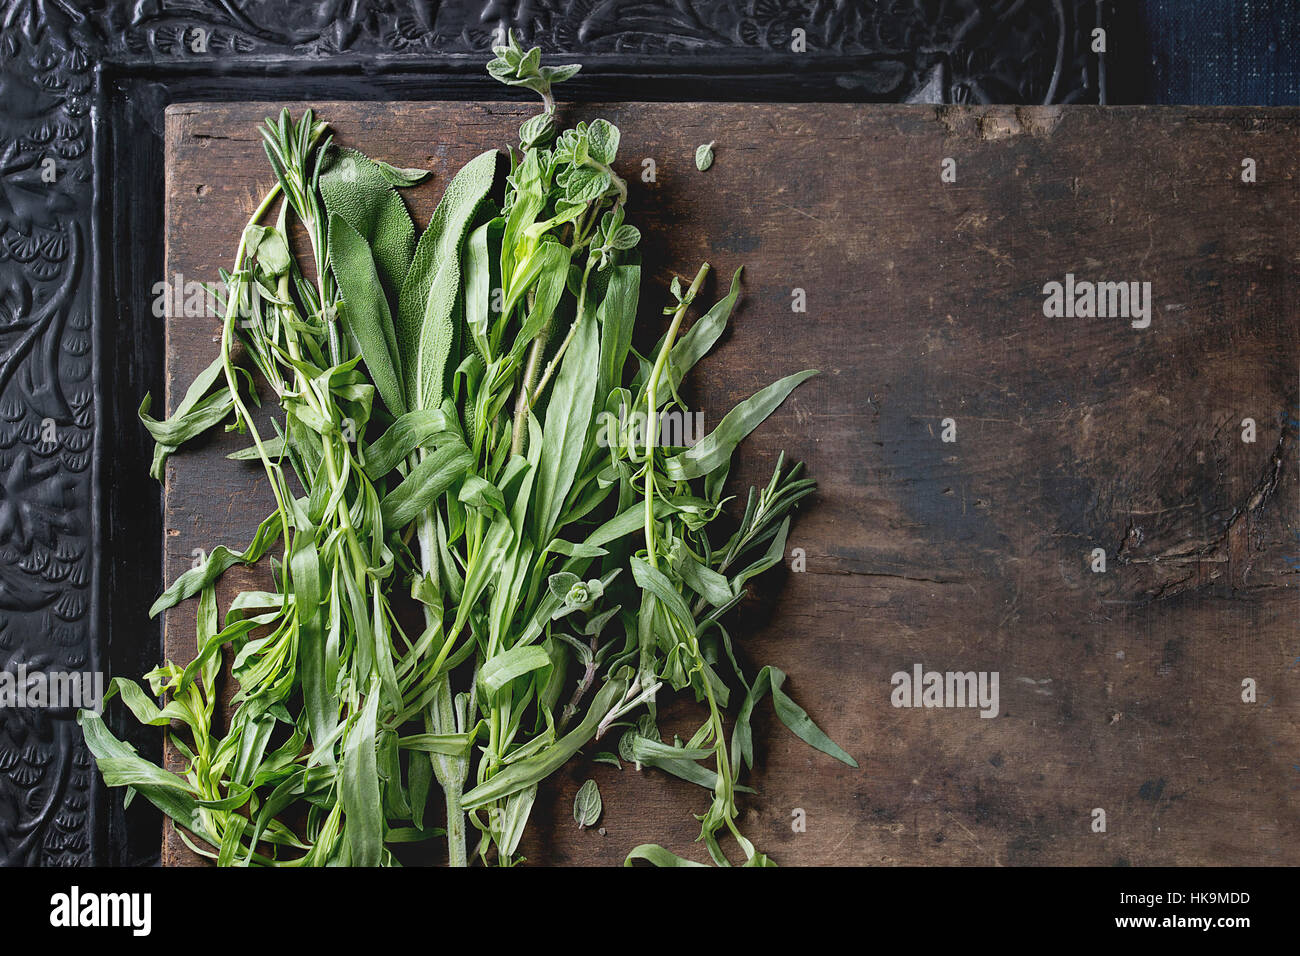 Bundle of fresh Italian herbs rosemary, oregano and sage over old dark wooden and black ornate background. Top view with copy space Stock Photo